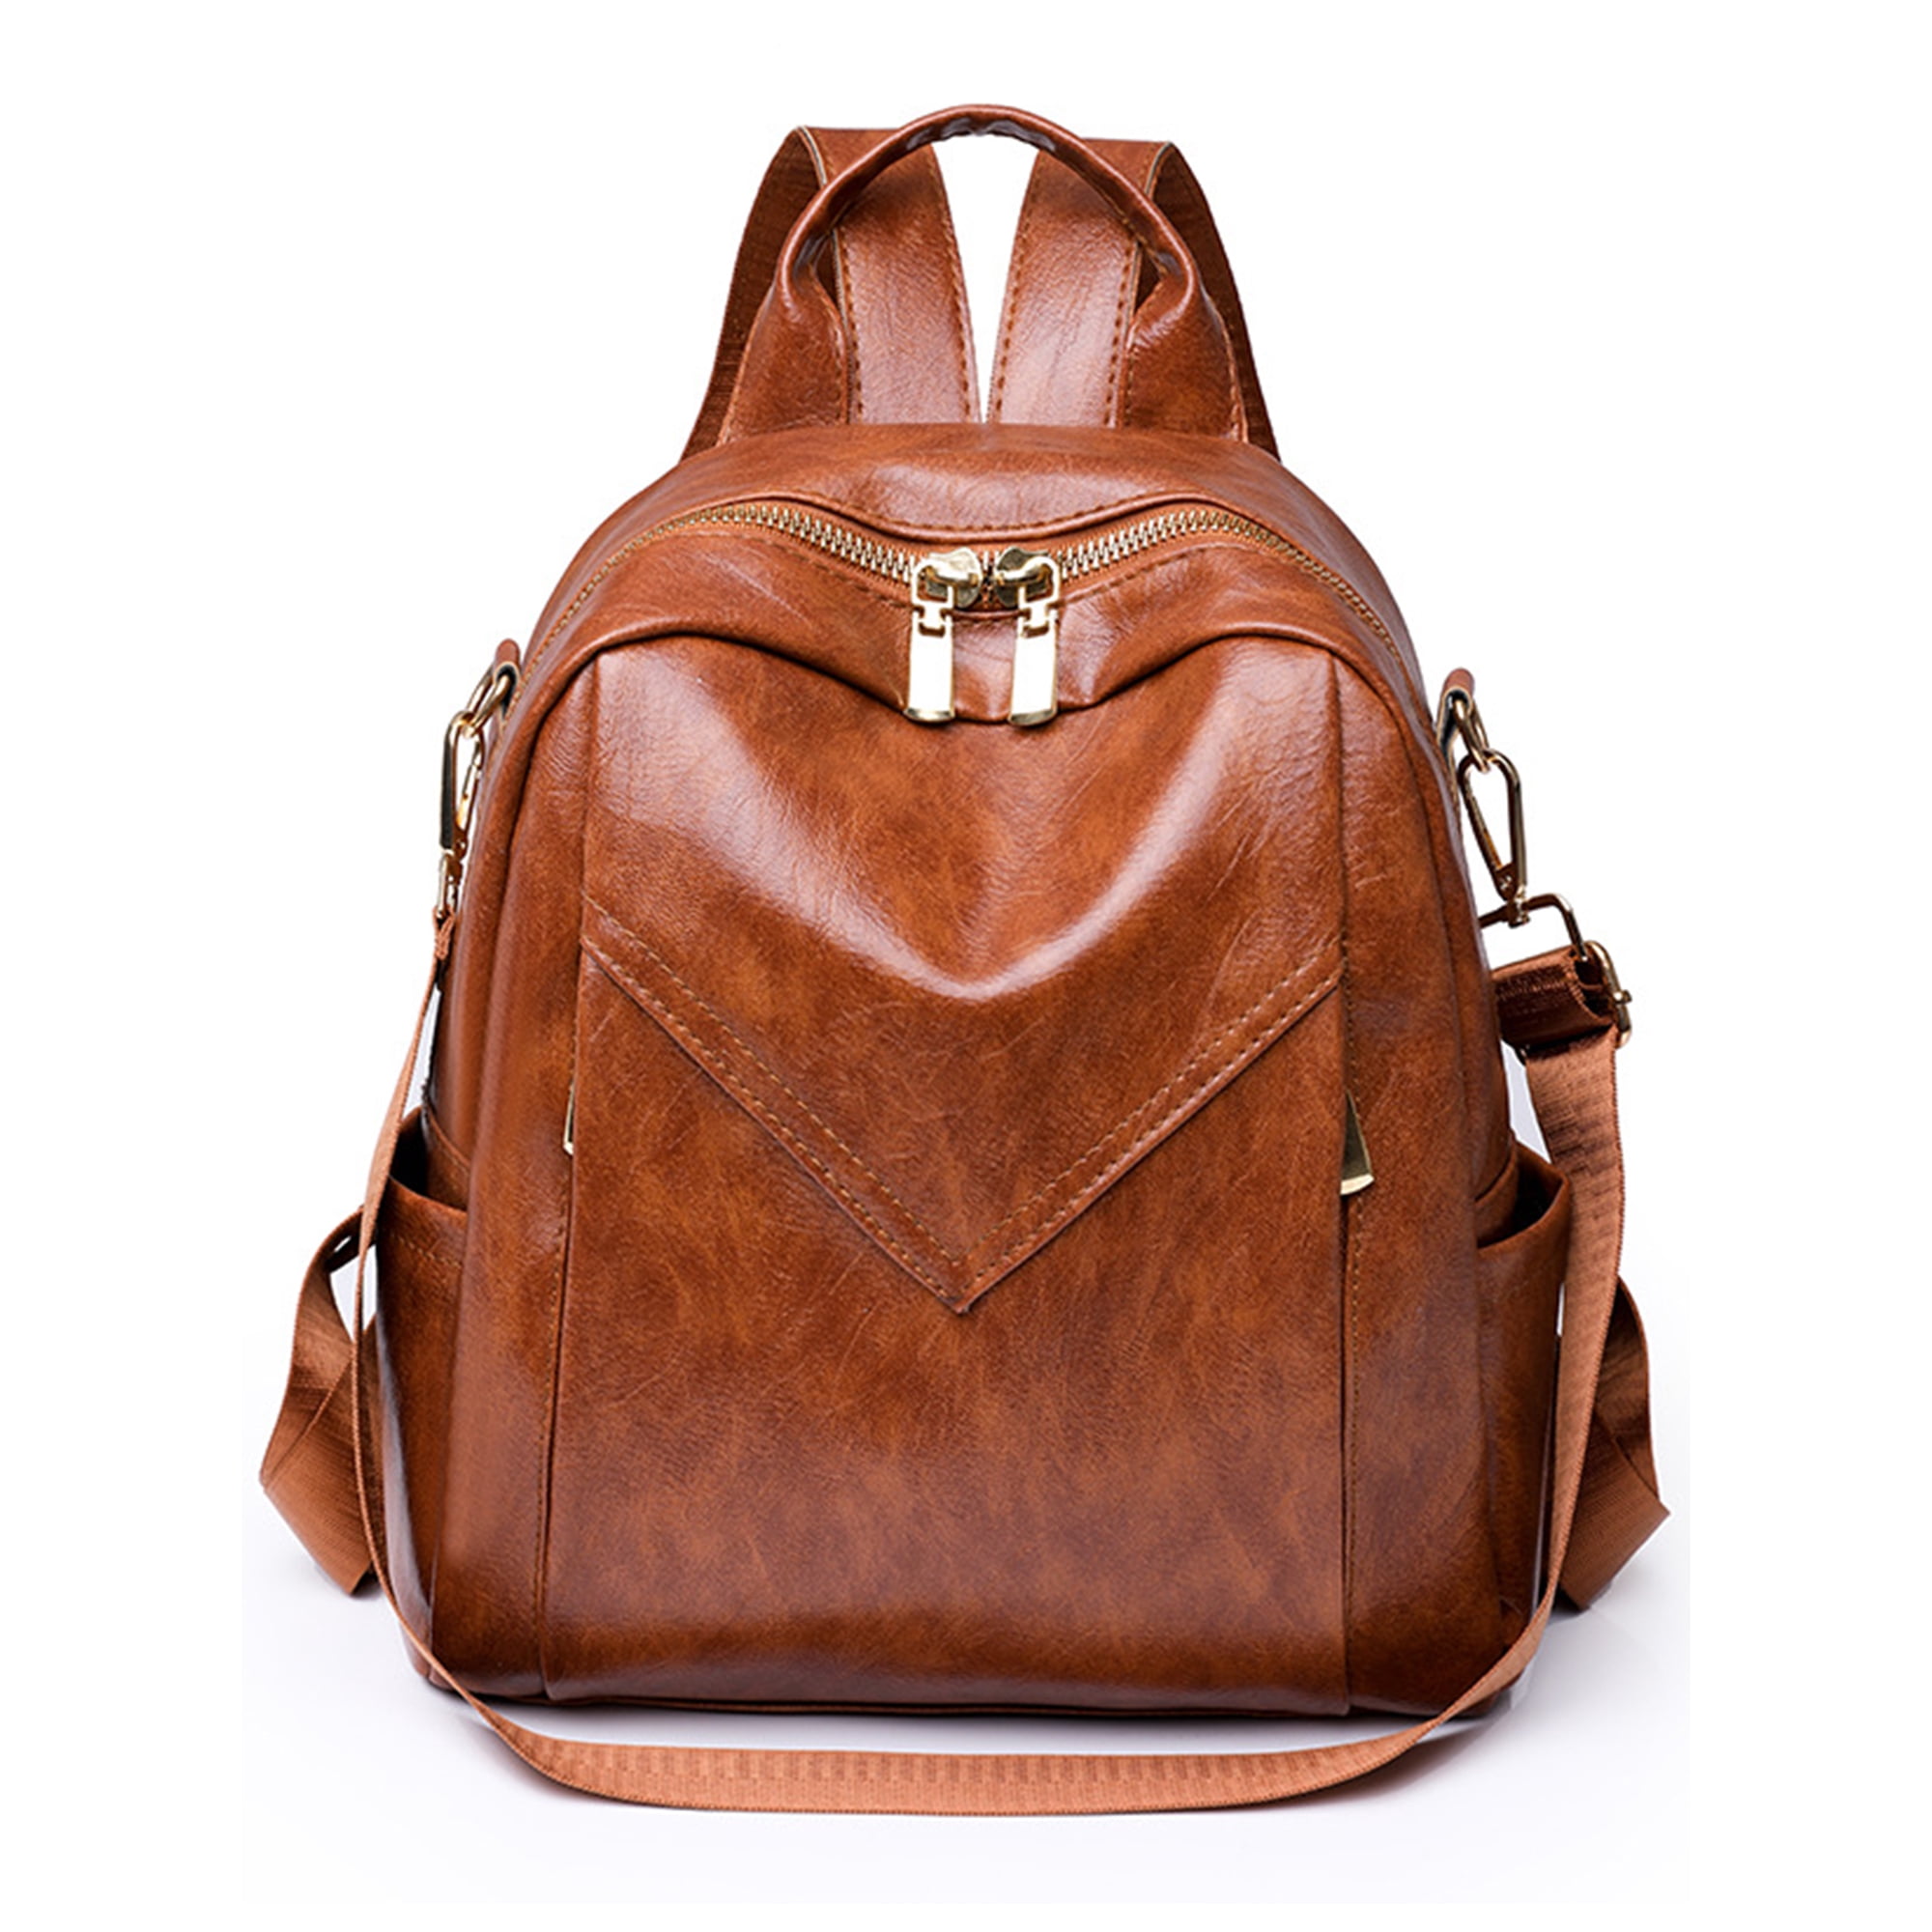 Deep Brown Leather Backpack Leather Rucksack Backpack Women 